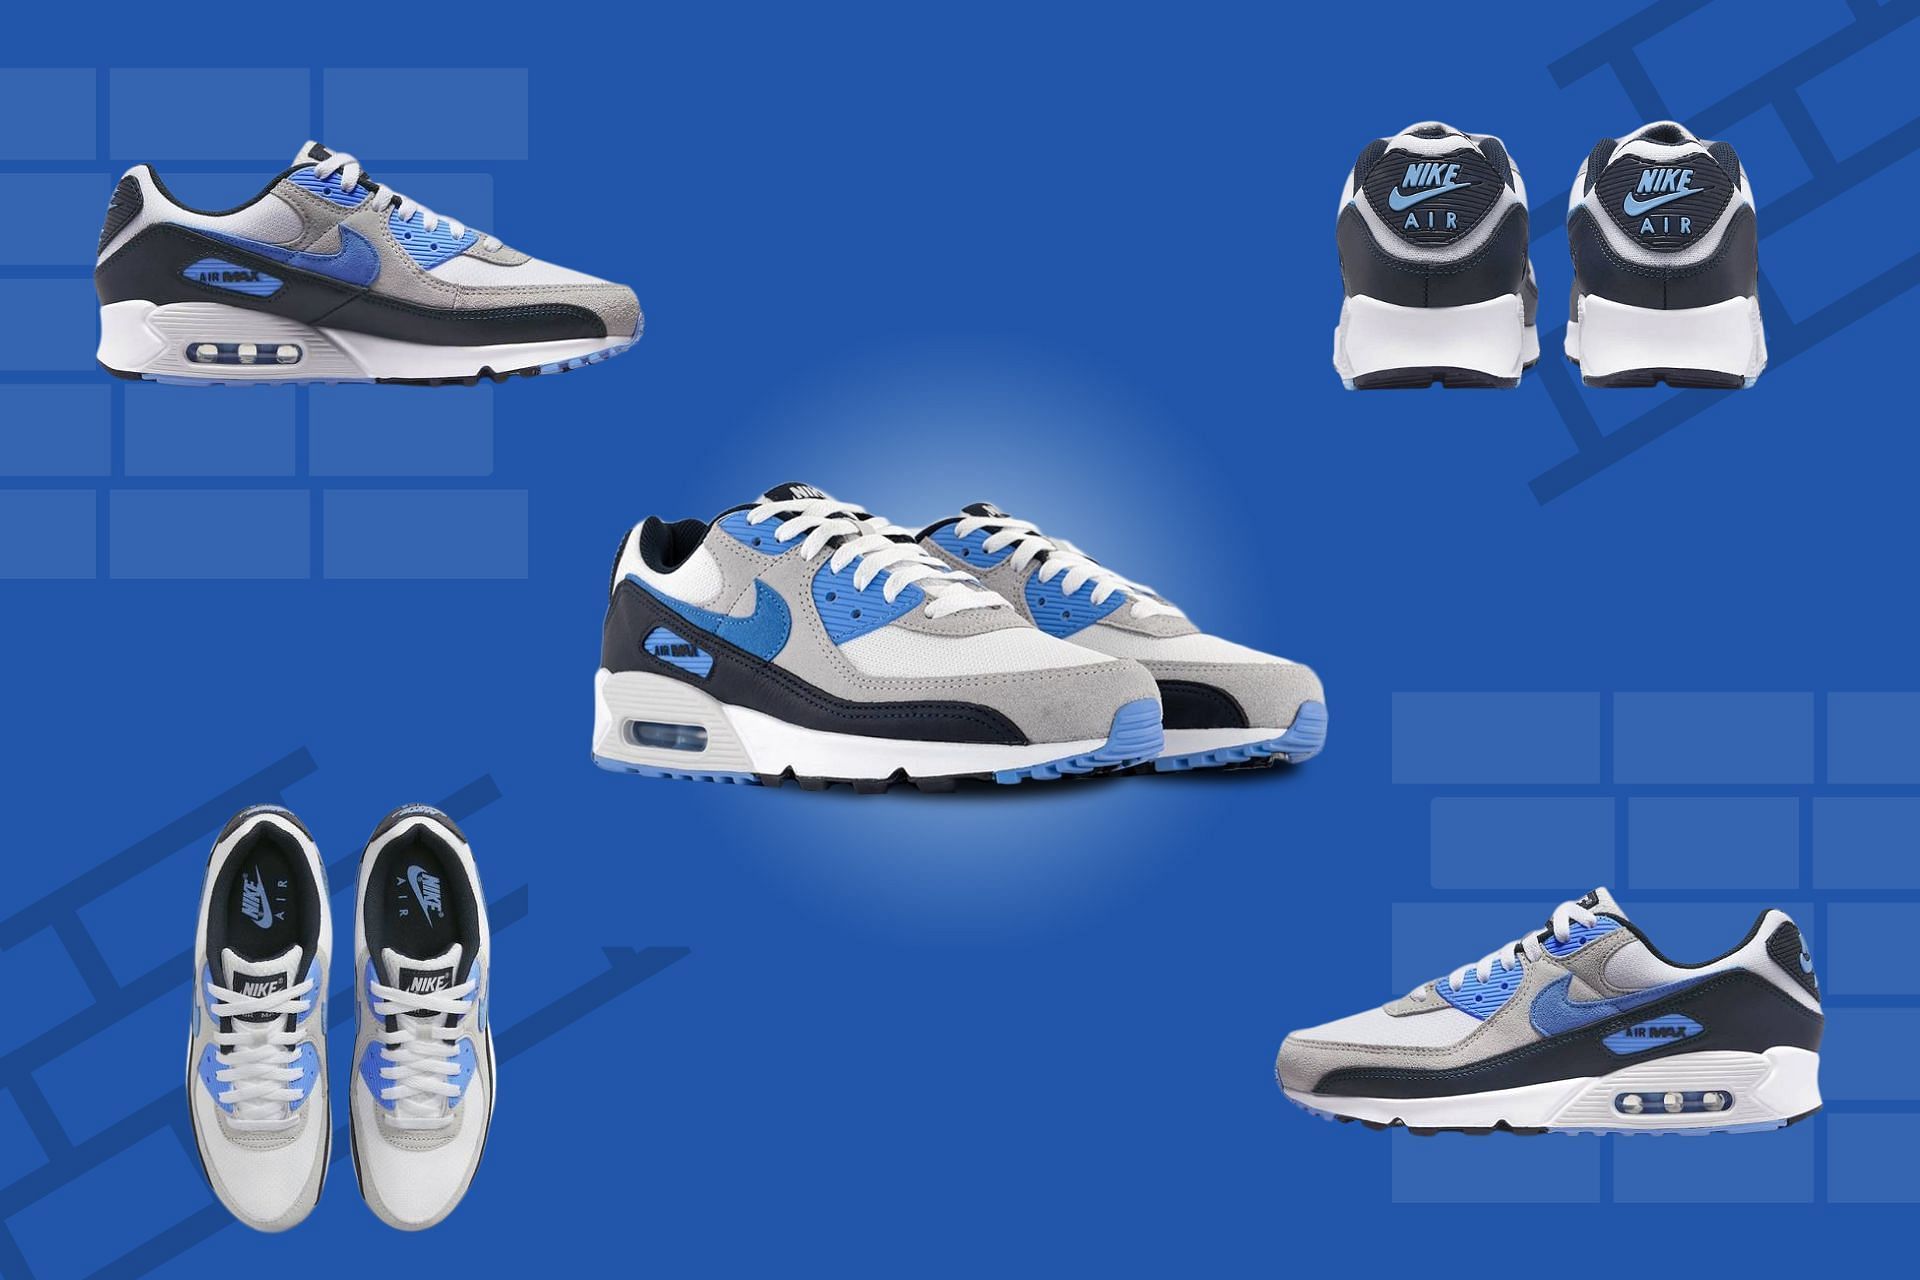 Unc: Nike Air Max 90 “Unc” Shoes: Where To Buy, Price, And More Details  Explored